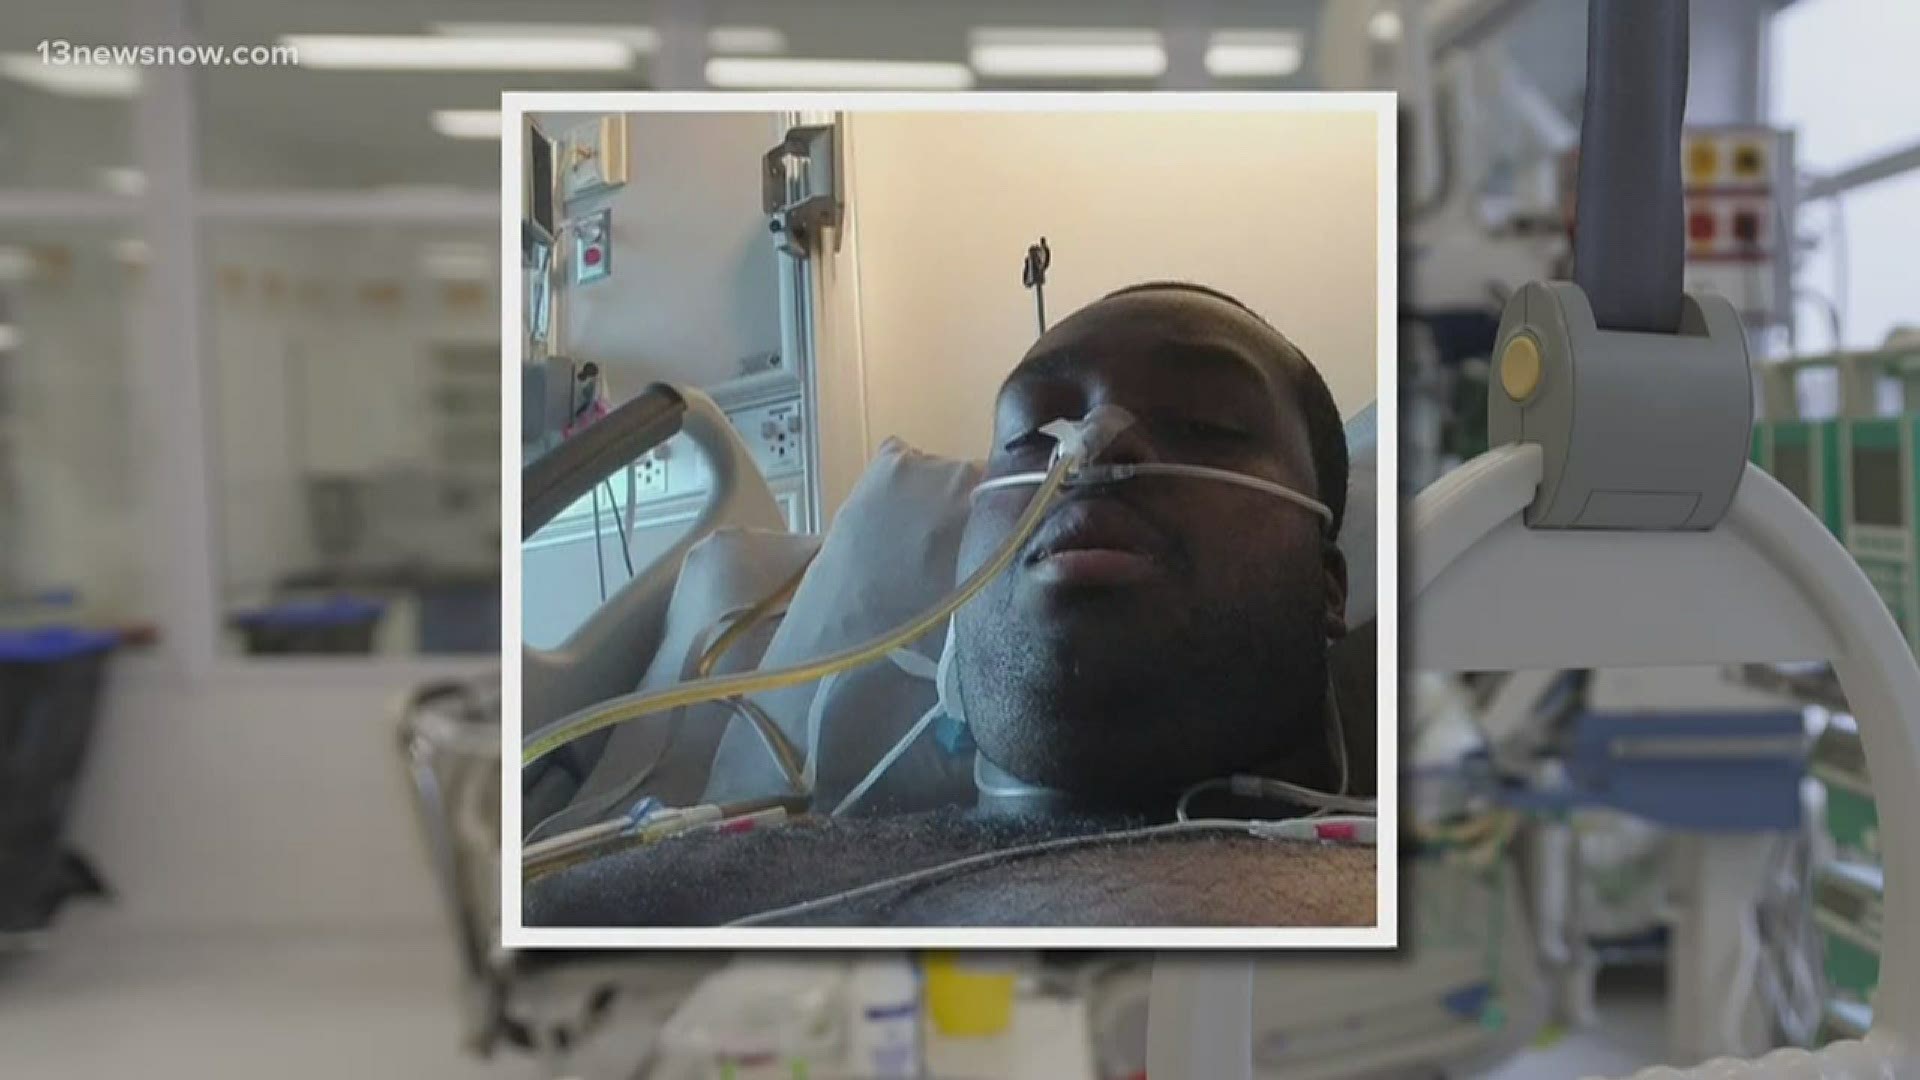 26-year-old Deion Campbell spent 12 days on the ventilator struggling to survive the coronavirus.